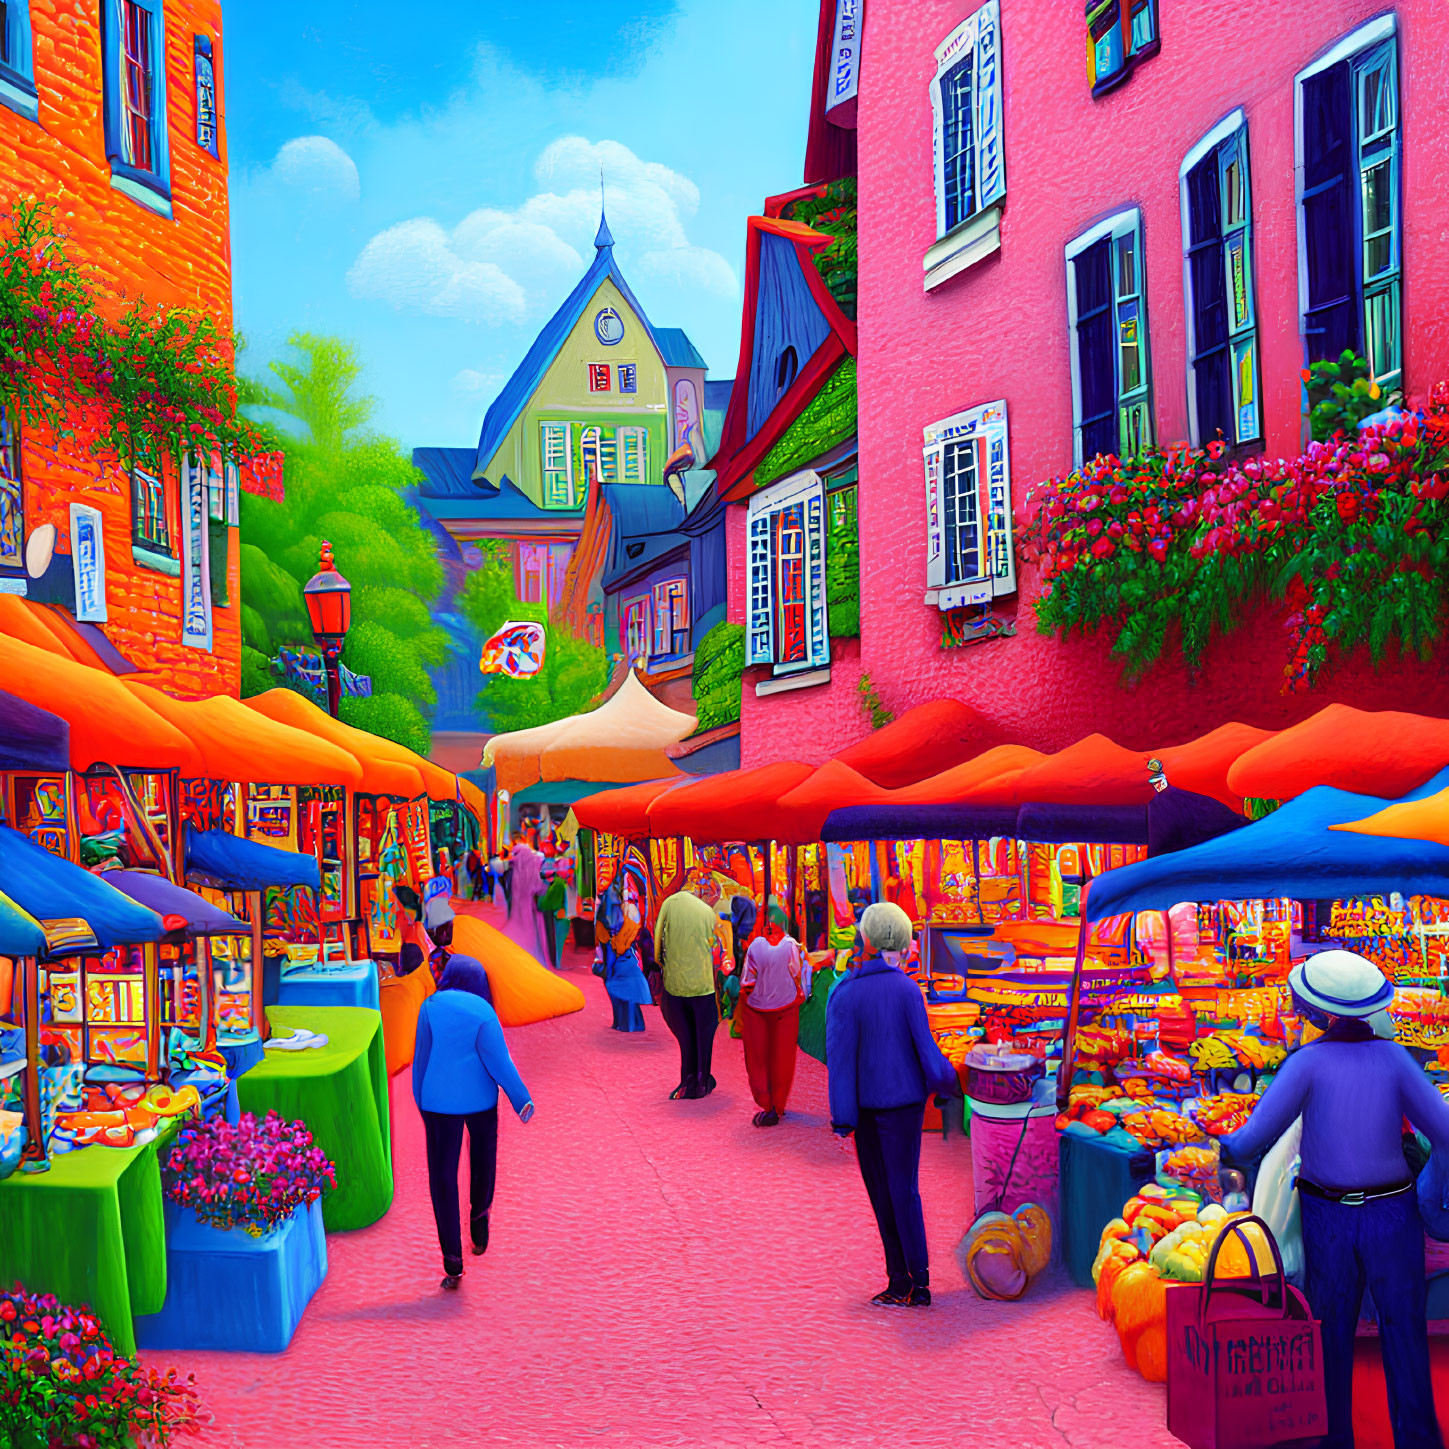 Colorful Outdoor Market Scene with Shoppers and Buildings Under Blue Sky